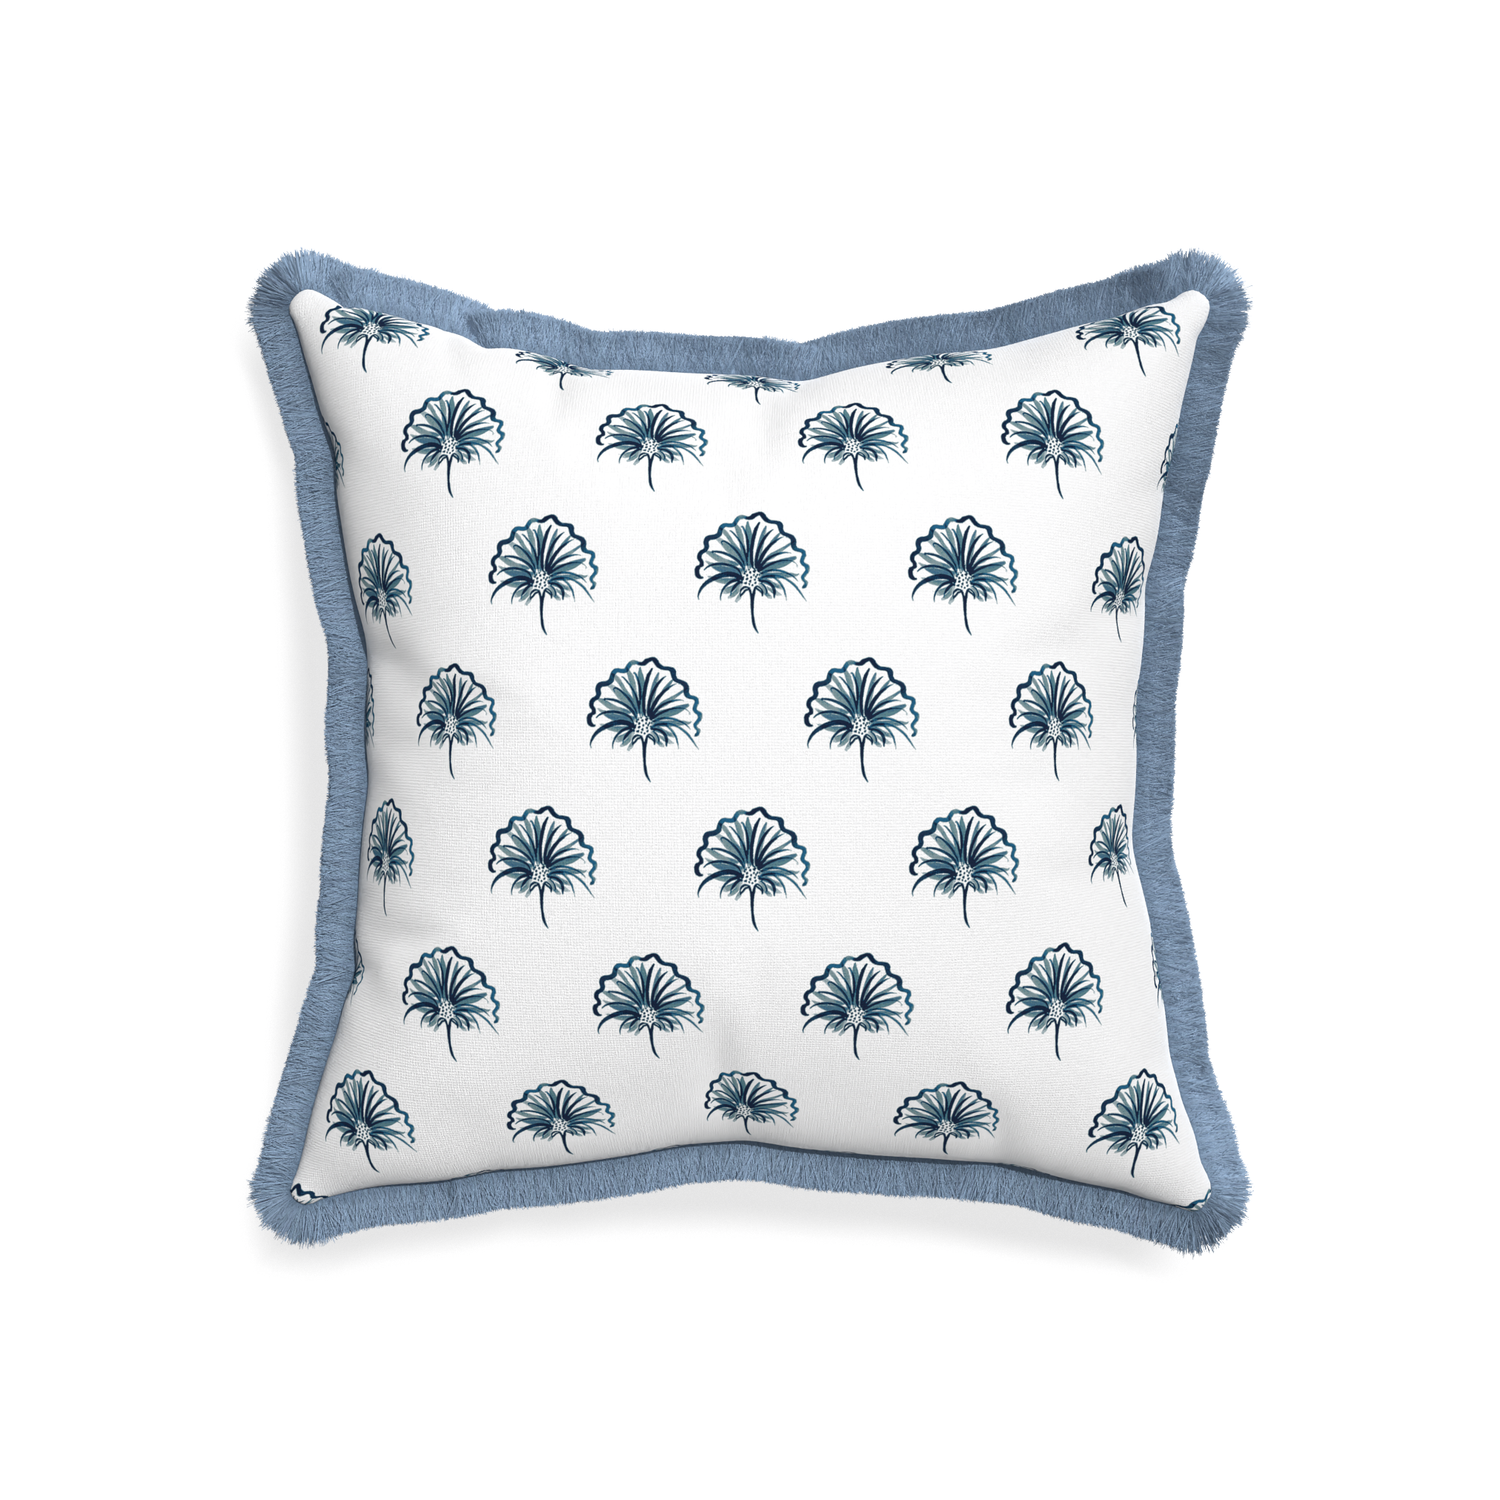 20-square penelope midnight custom pillow with sky fringe on white background